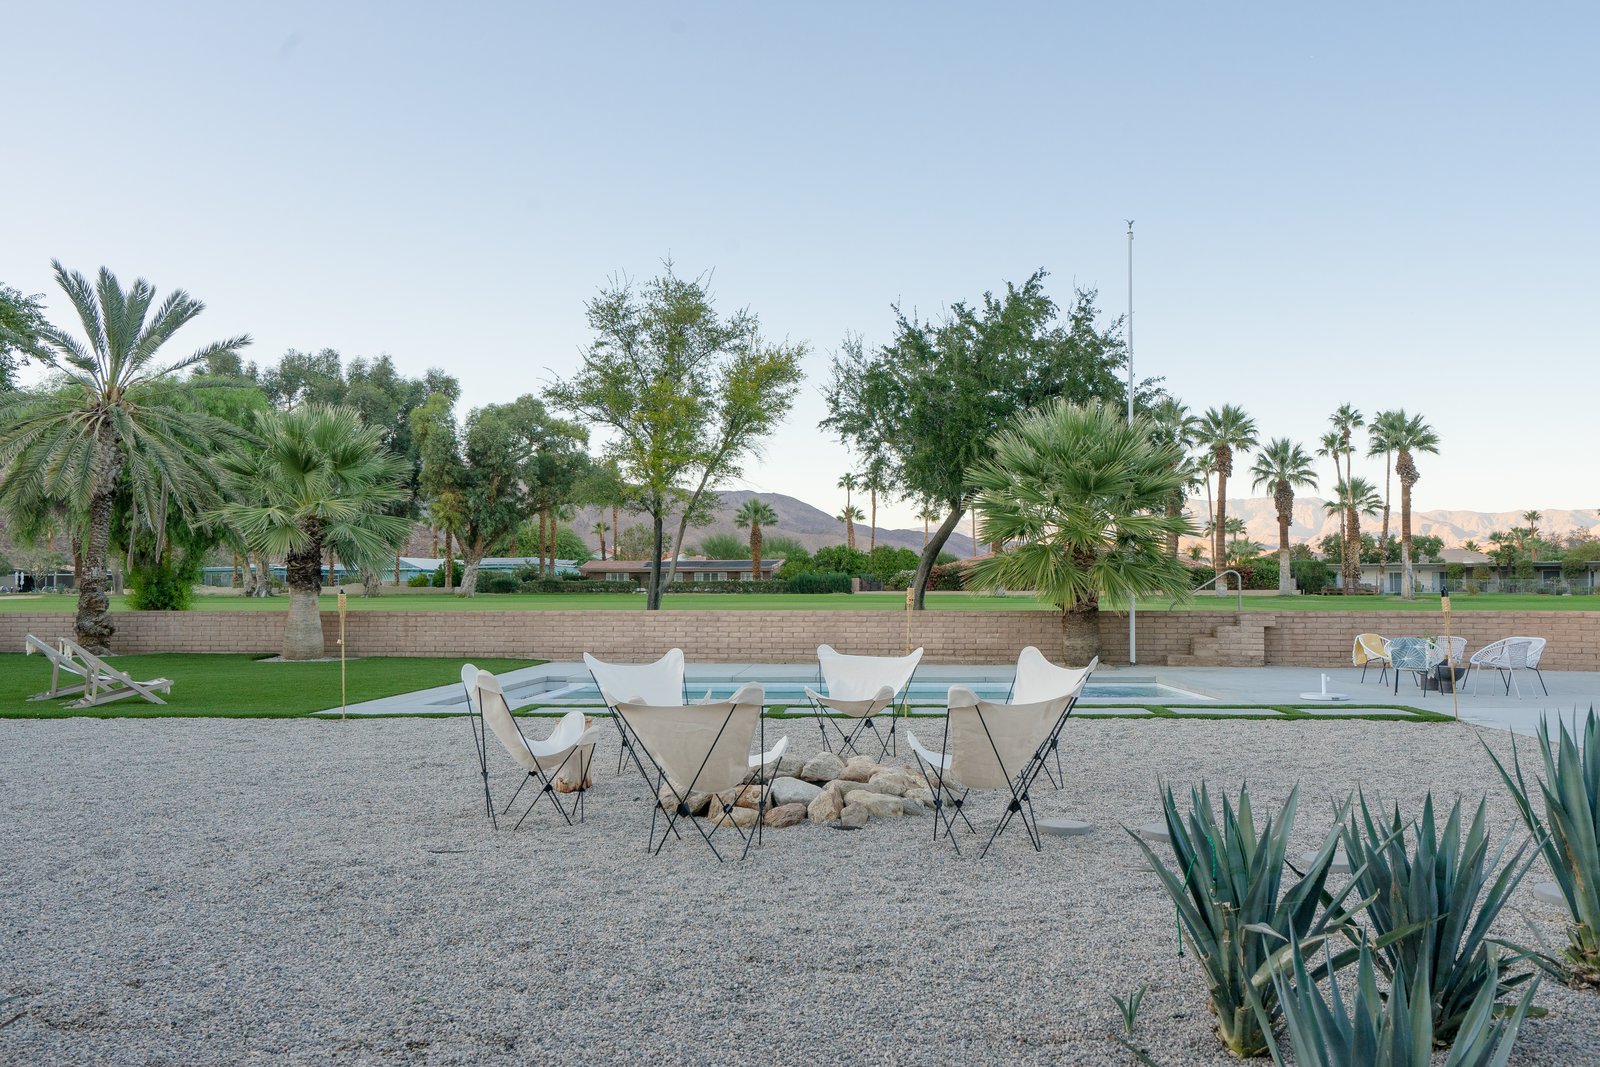 The stone-edged fire pit is a family favorite. "We do s'mores around the fire every time we go, walk the golf course at night, and love watching the sunsets against the pink mountains," she says. 